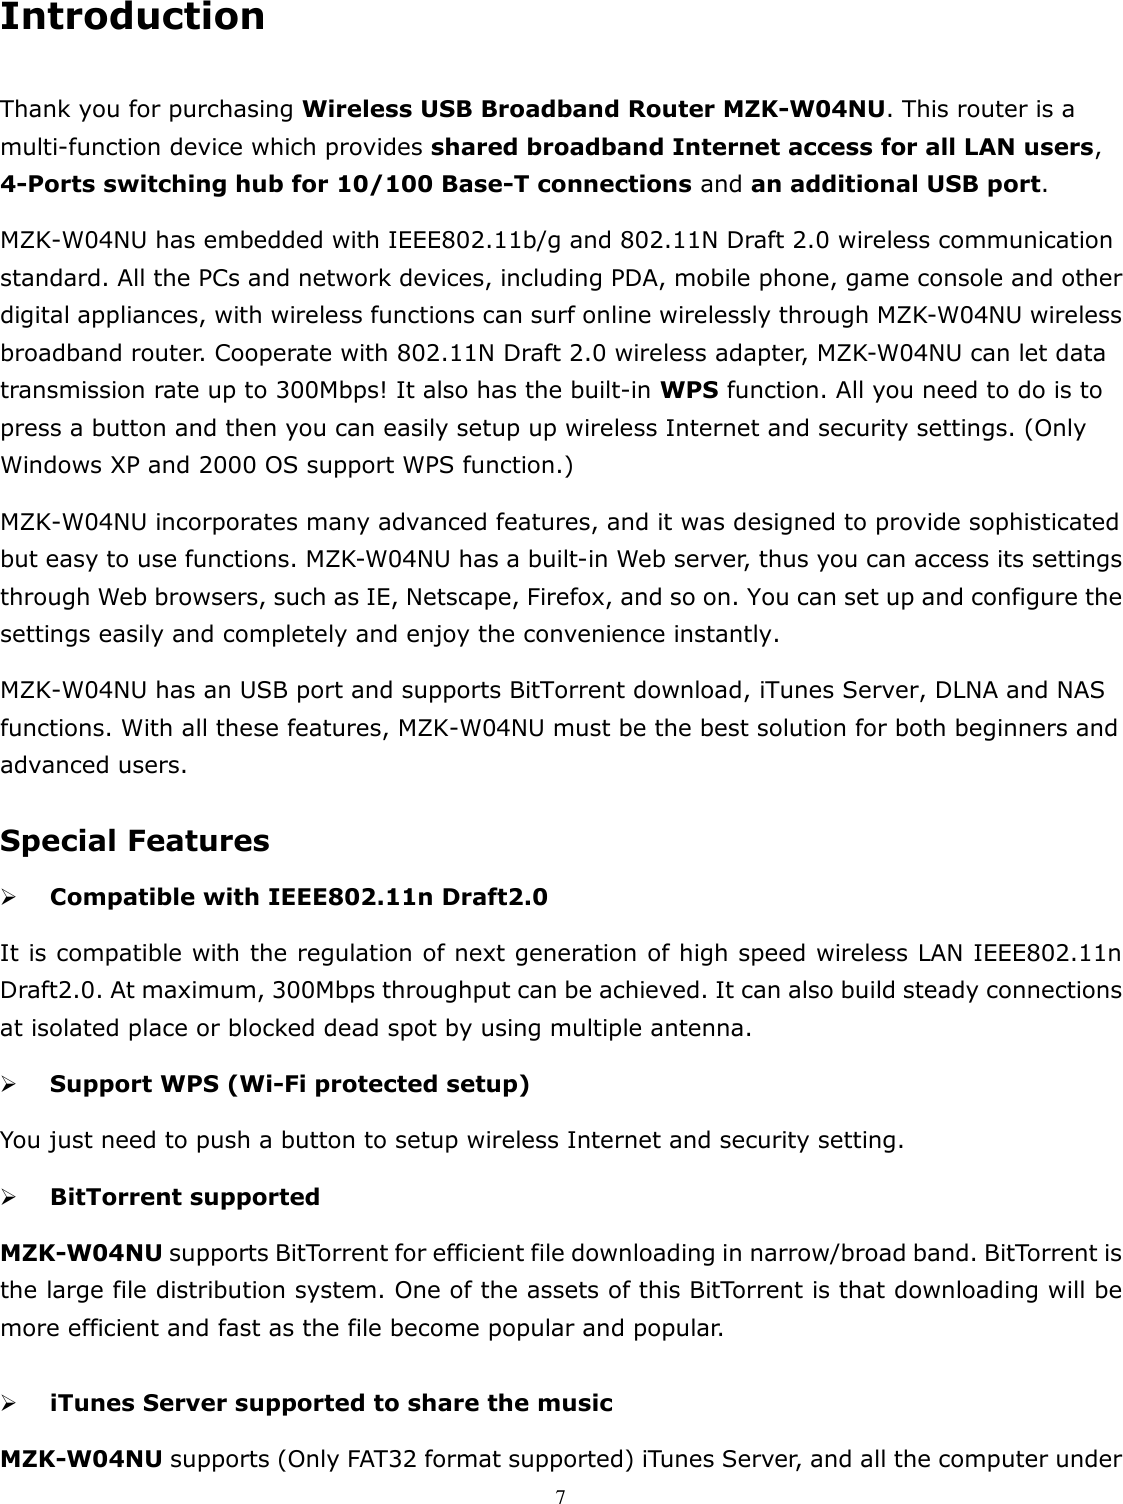   7 Introduction  Thank you for purchasing Wireless USB Broadband Router MZK-W04NU. This router is a multi-function device which provides shared broadband Internet access for all LAN users, 4-Ports switching hub for 10/100 Base-T connections and an additional USB port. MZK-W04NU has embedded with IEEE802.11b/g and 802.11N Draft 2.0 wireless communication standard. All the PCs and network devices, including PDA, mobile phone, game console and other digital appliances, with wireless functions can surf online wirelessly through MZK-W04NU wireless broadband router. Cooperate with 802.11N Draft 2.0 wireless adapter, MZK-W04NU can let data transmission rate up to 300Mbps! It also has the built-in WPS function. All you need to do is to press a button and then you can easily setup up wireless Internet and security settings. (Only Windows XP and 2000 OS support WPS function.) MZK-W04NU incorporates many advanced features, and it was designed to provide sophisticated but easy to use functions. MZK-W04NU has a built-in Web server, thus you can access its settings through Web browsers, such as IE, Netscape, Firefox, and so on. You can set up and configure the settings easily and completely and enjoy the convenience instantly. MZK-W04NU has an USB port and supports BitTorrent download, iTunes Server, DLNA and NAS functions. With all these features, MZK-W04NU must be the best solution for both beginners and advanced users.    Special Features  Compatible with IEEE802.11n Draft2.0 It is compatible with the regulation of next generation of high speed wireless LAN IEEE802.11n Draft2.0. At maximum, 300Mbps throughput can be achieved. It can also build steady connections at isolated place or blocked dead spot by using multiple antenna.  Support WPS (Wi-Fi protected setup) You just need to push a button to setup wireless Internet and security setting.  BitTorrent supported MZK-W04NU supports BitTorrent for efficient file downloading in narrow/broad band. BitTorrent is the large file distribution system. One of the assets of this BitTorrent is that downloading will be more efficient and fast as the file become popular and popular.   iTunes Server supported to share the music   MZK-W04NU supports (Only FAT32 format supported) iTunes Server, and all the computer under 